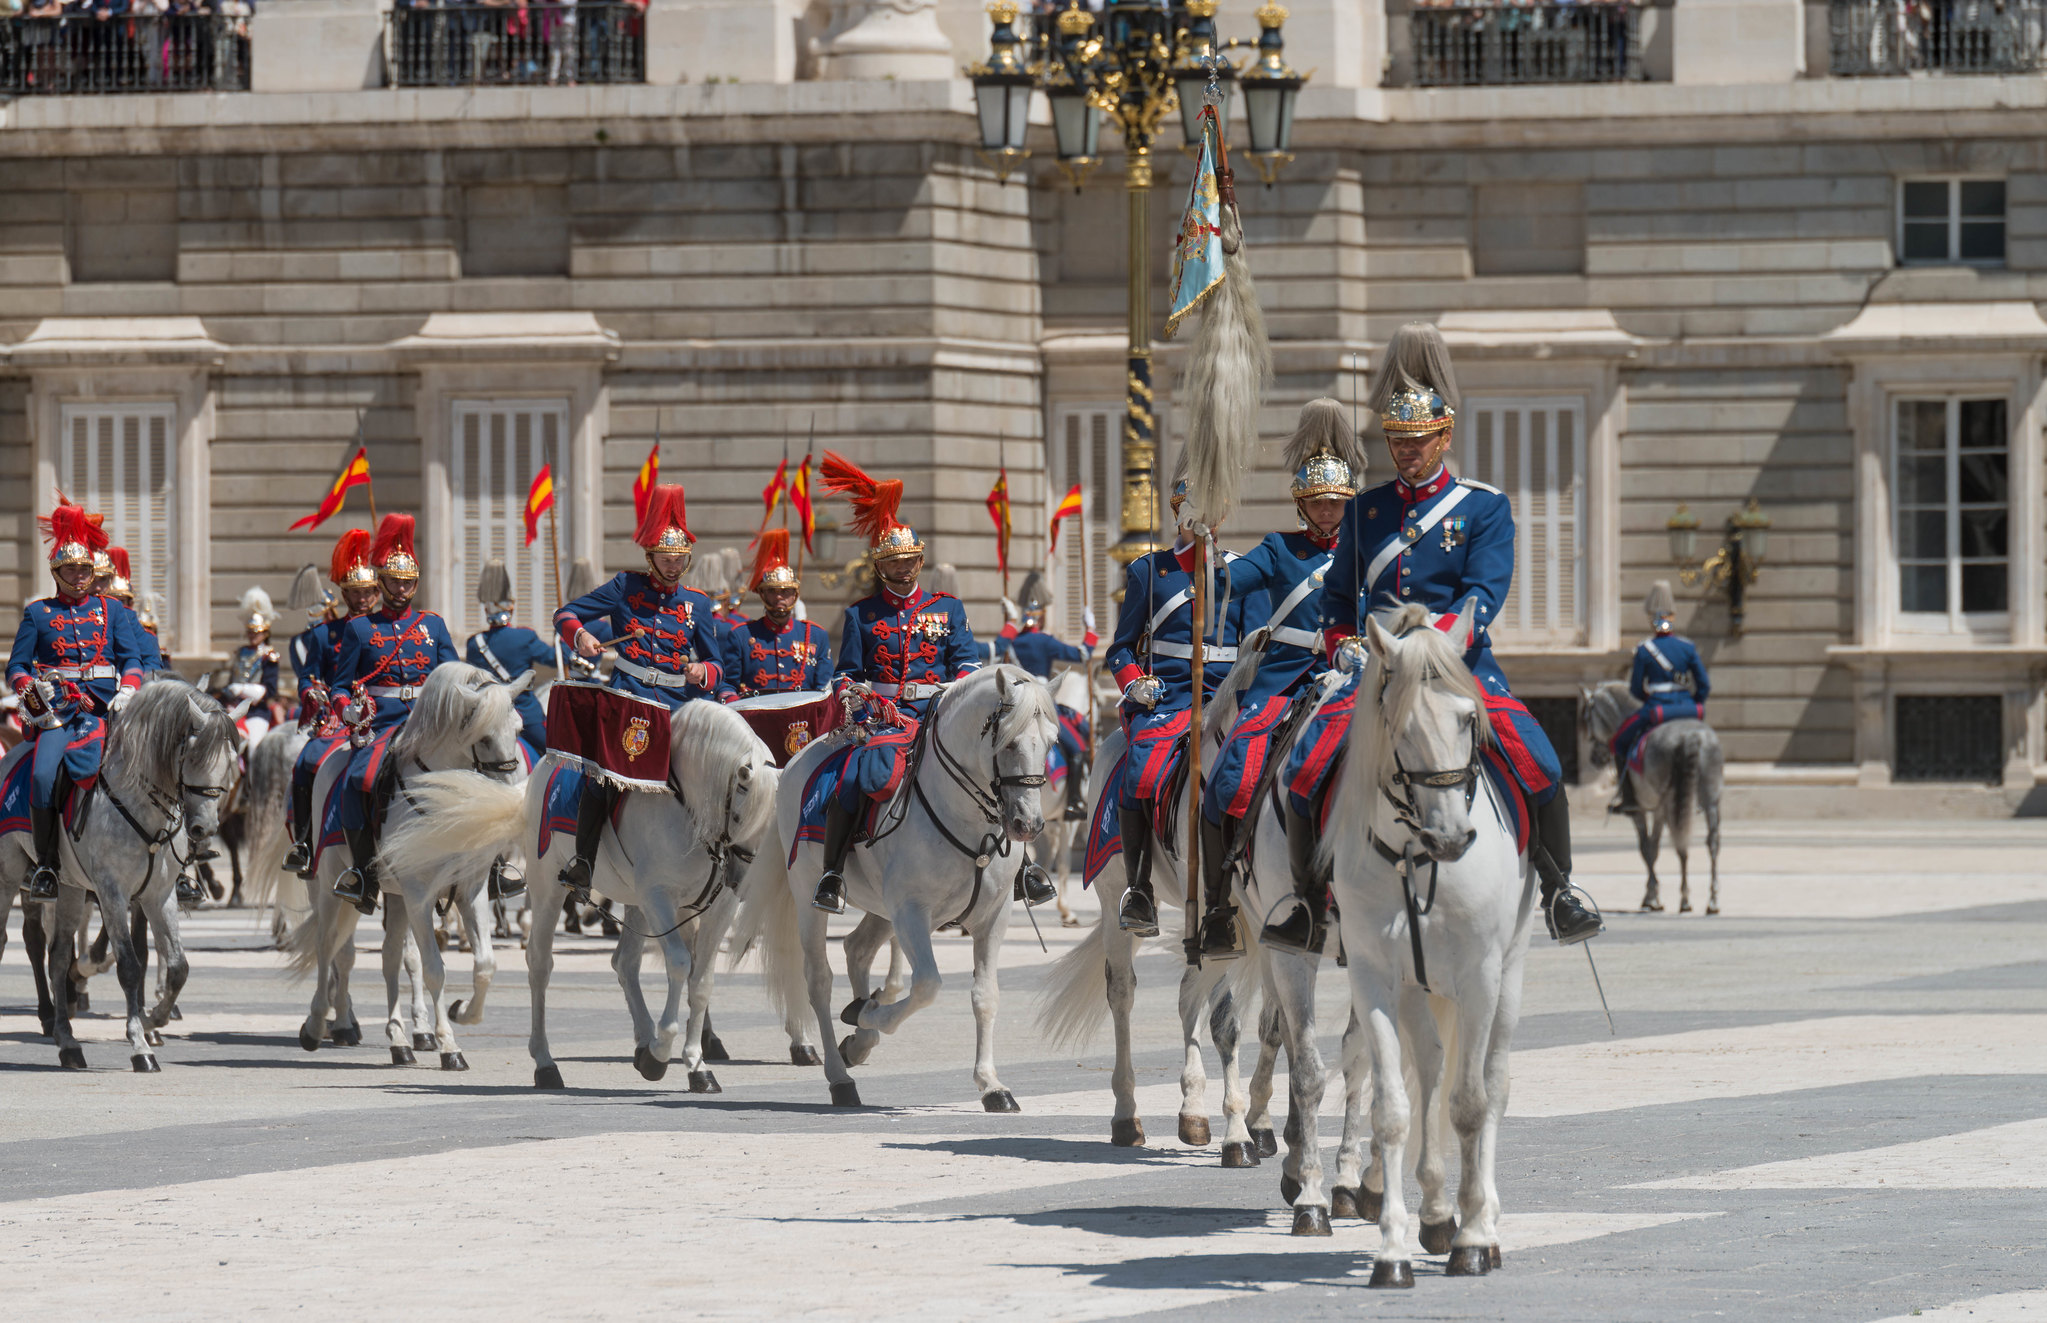 Royal Spanish guards on Parade during the changing of the guard